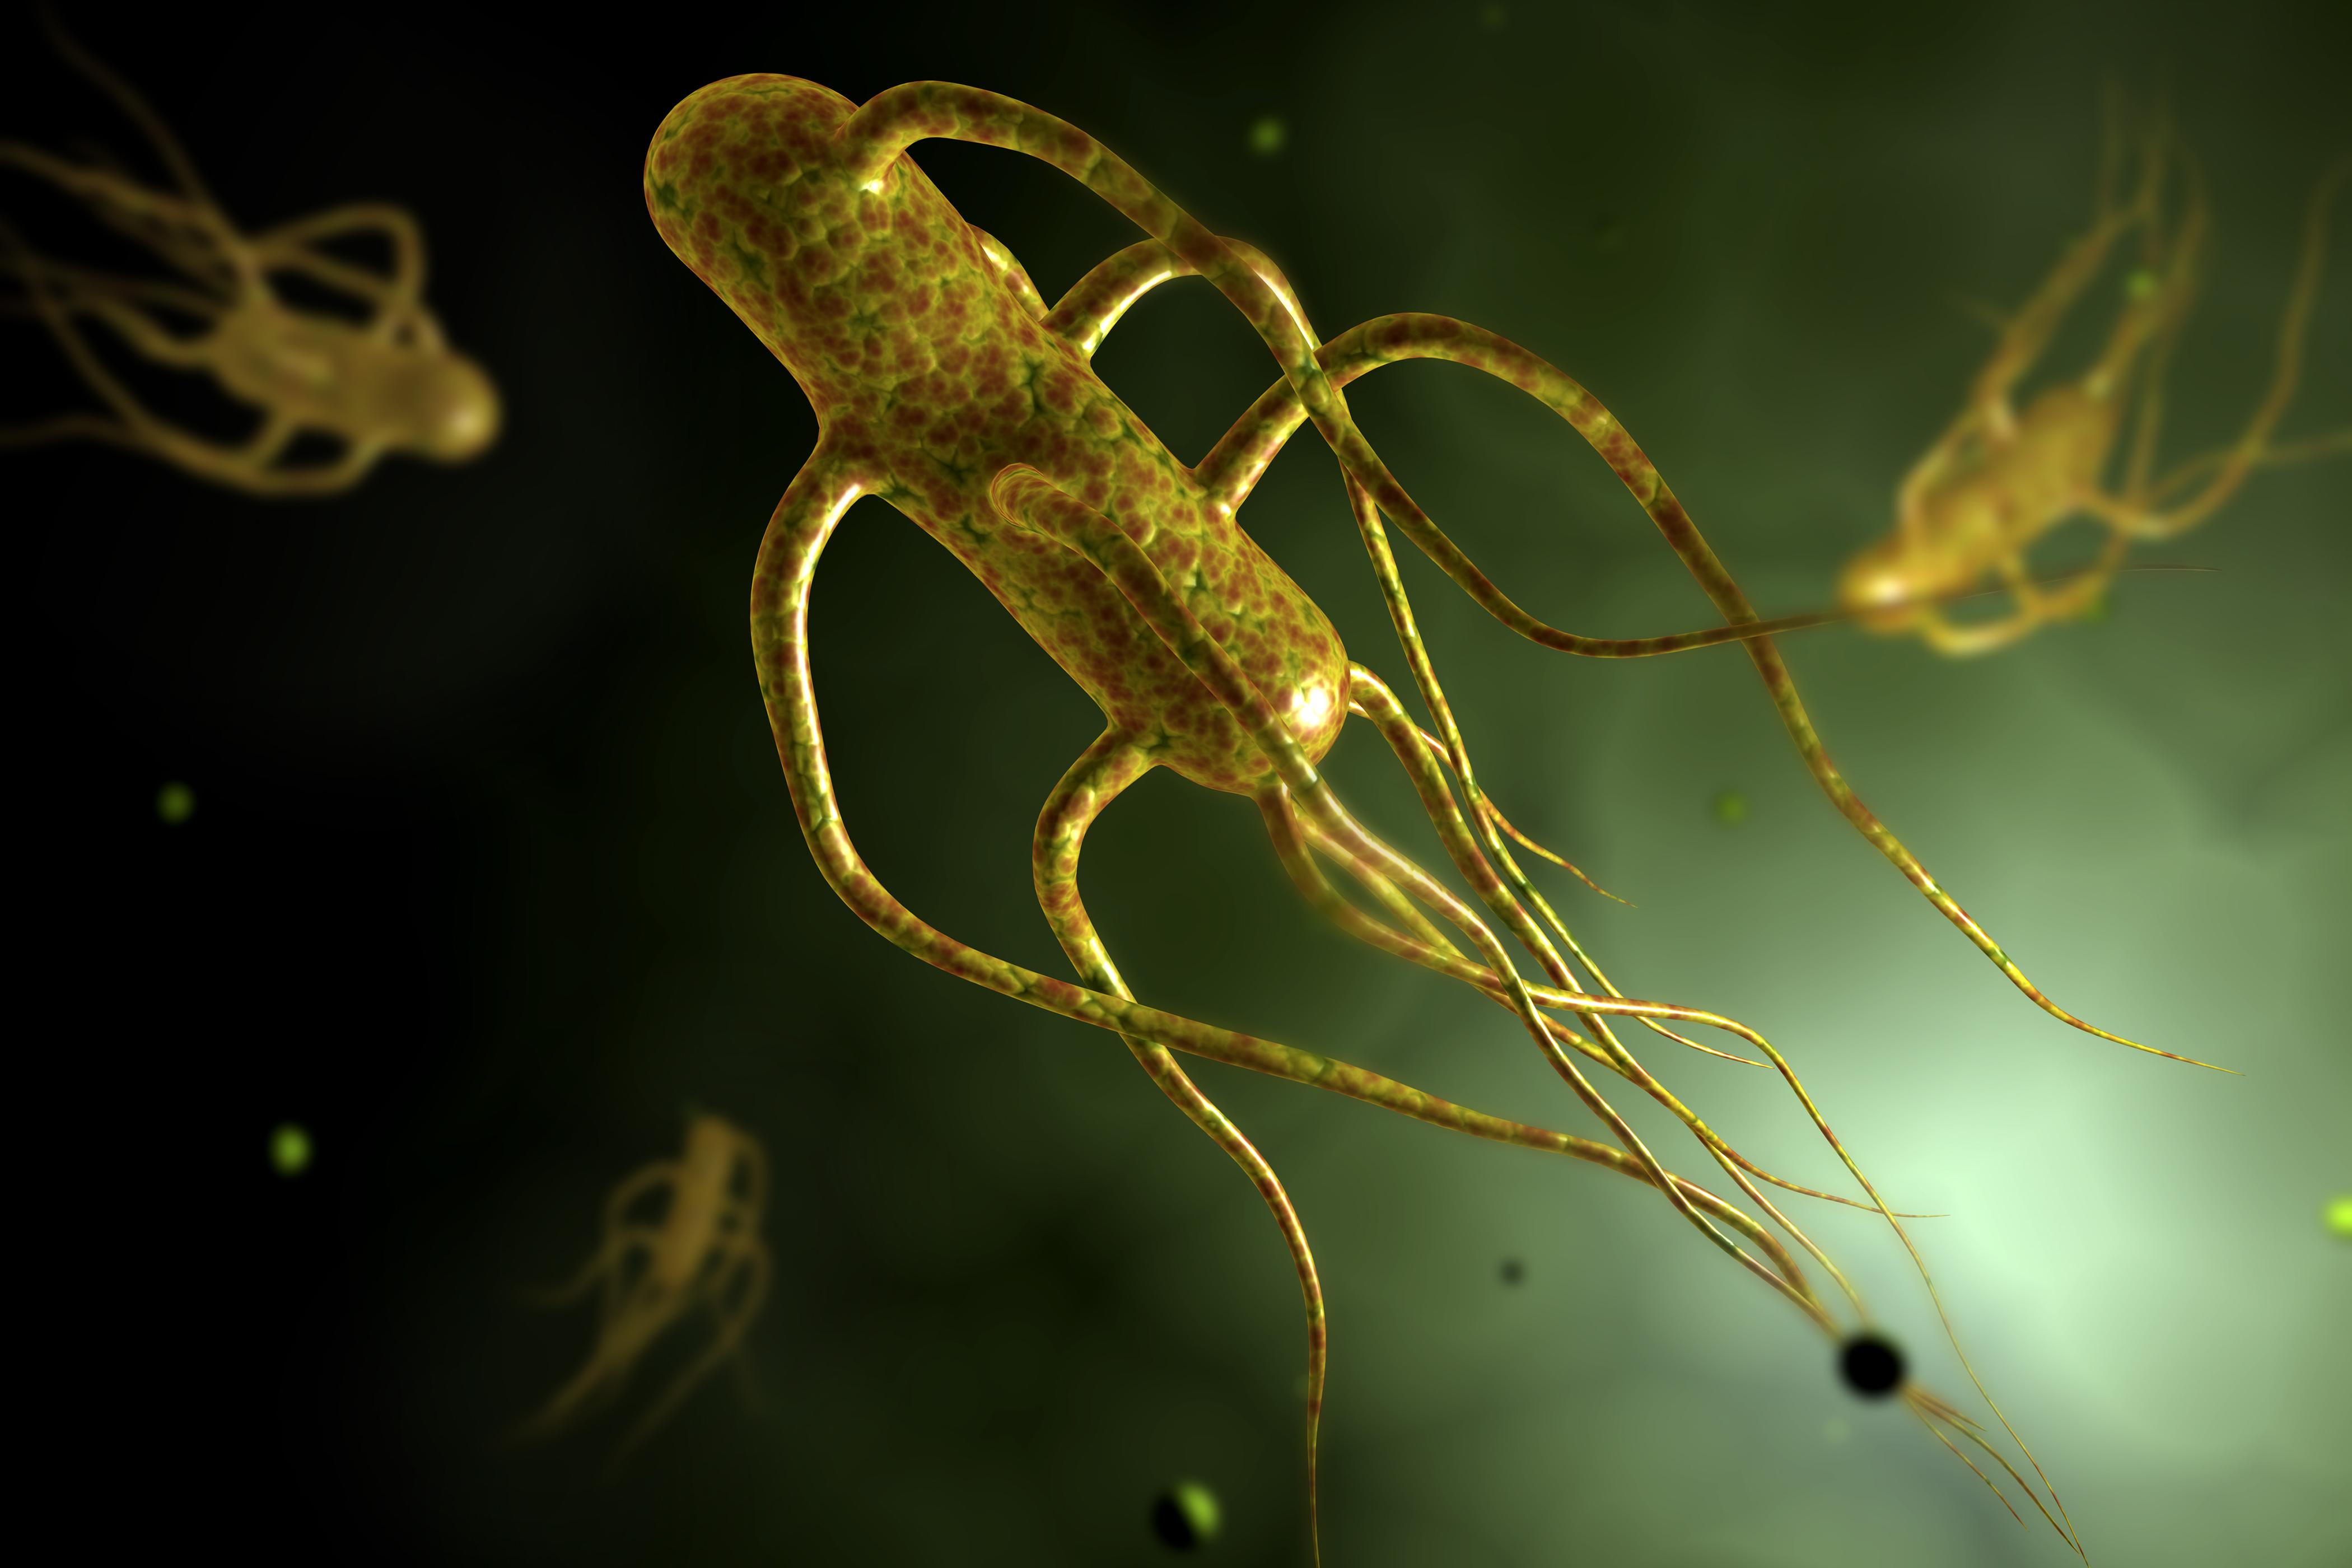 Conceptual image of salmonella typhi causing typhoid. (Getty Images)